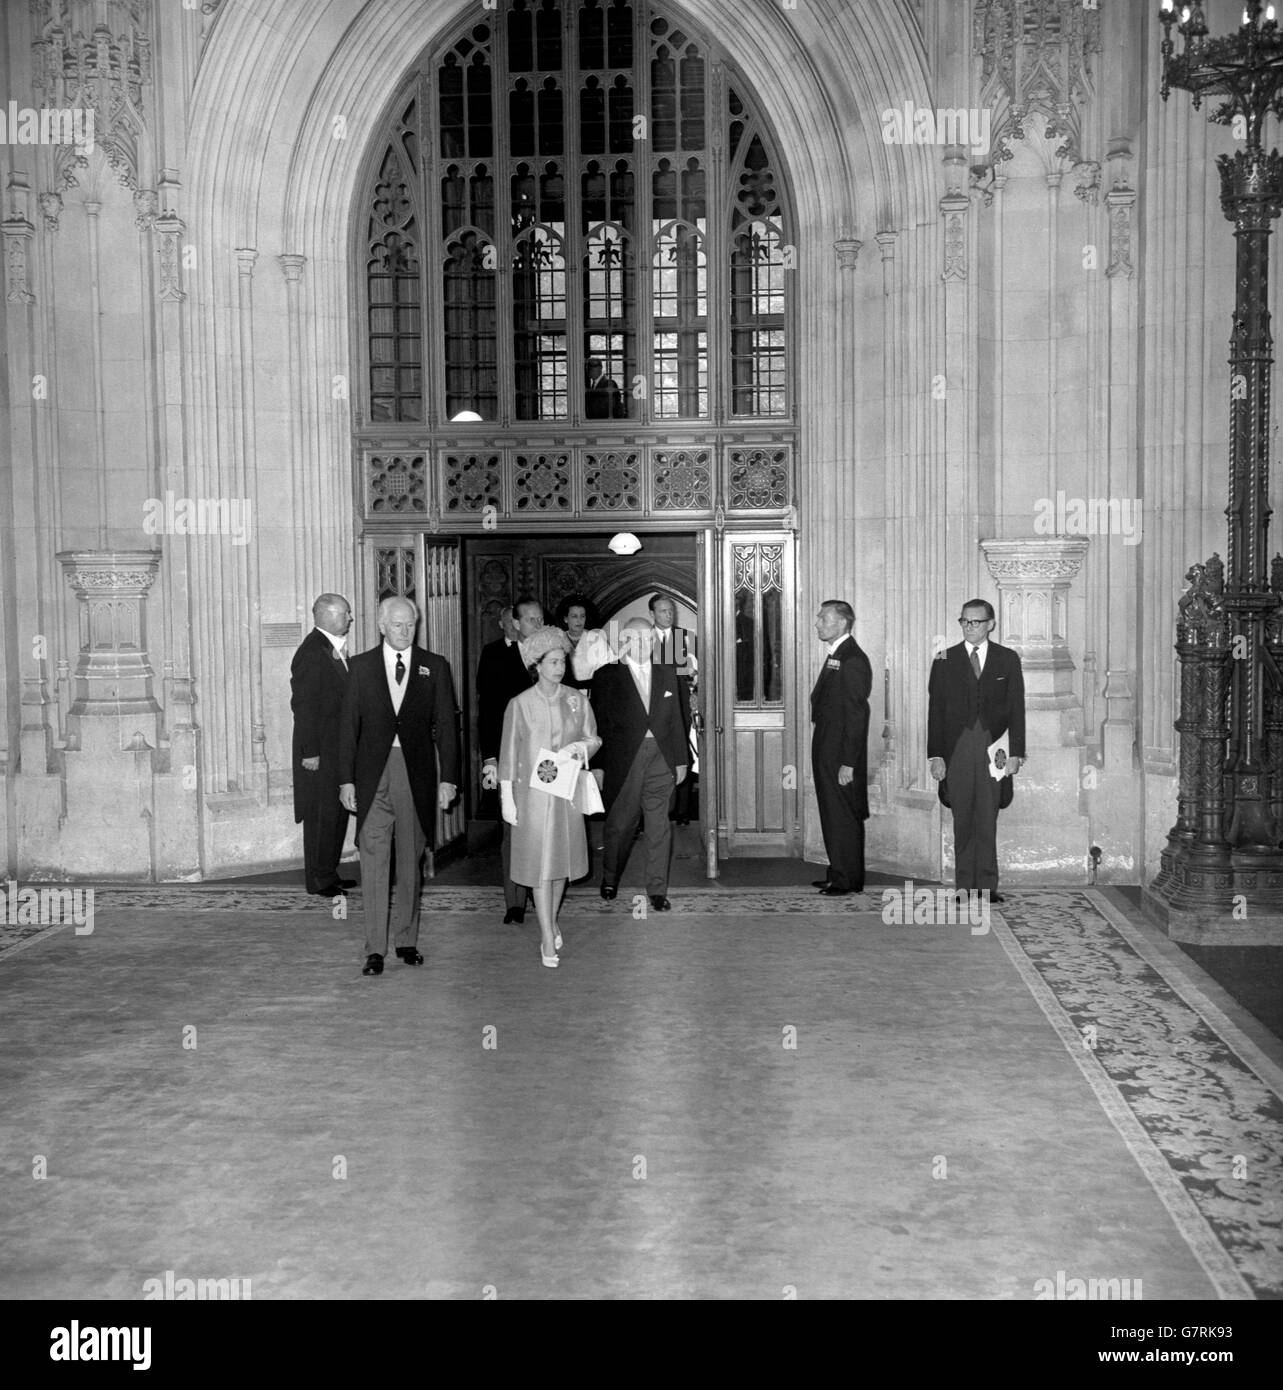 The Queen pictured with Lord Cholmondeley, the Lord Great Chamberlain (l), when she arrived at Westminster Hall, London, to attend a ceremony marking the 700th anniversary of Simon de Montfort's Parliament, the first to which representatives of the towns were summoned. The ceremony took the form of presentation of addresses to the Queen by both Houses of Parliament. Just behind the Queen is the Duke of Edinburgh. Stock Photo